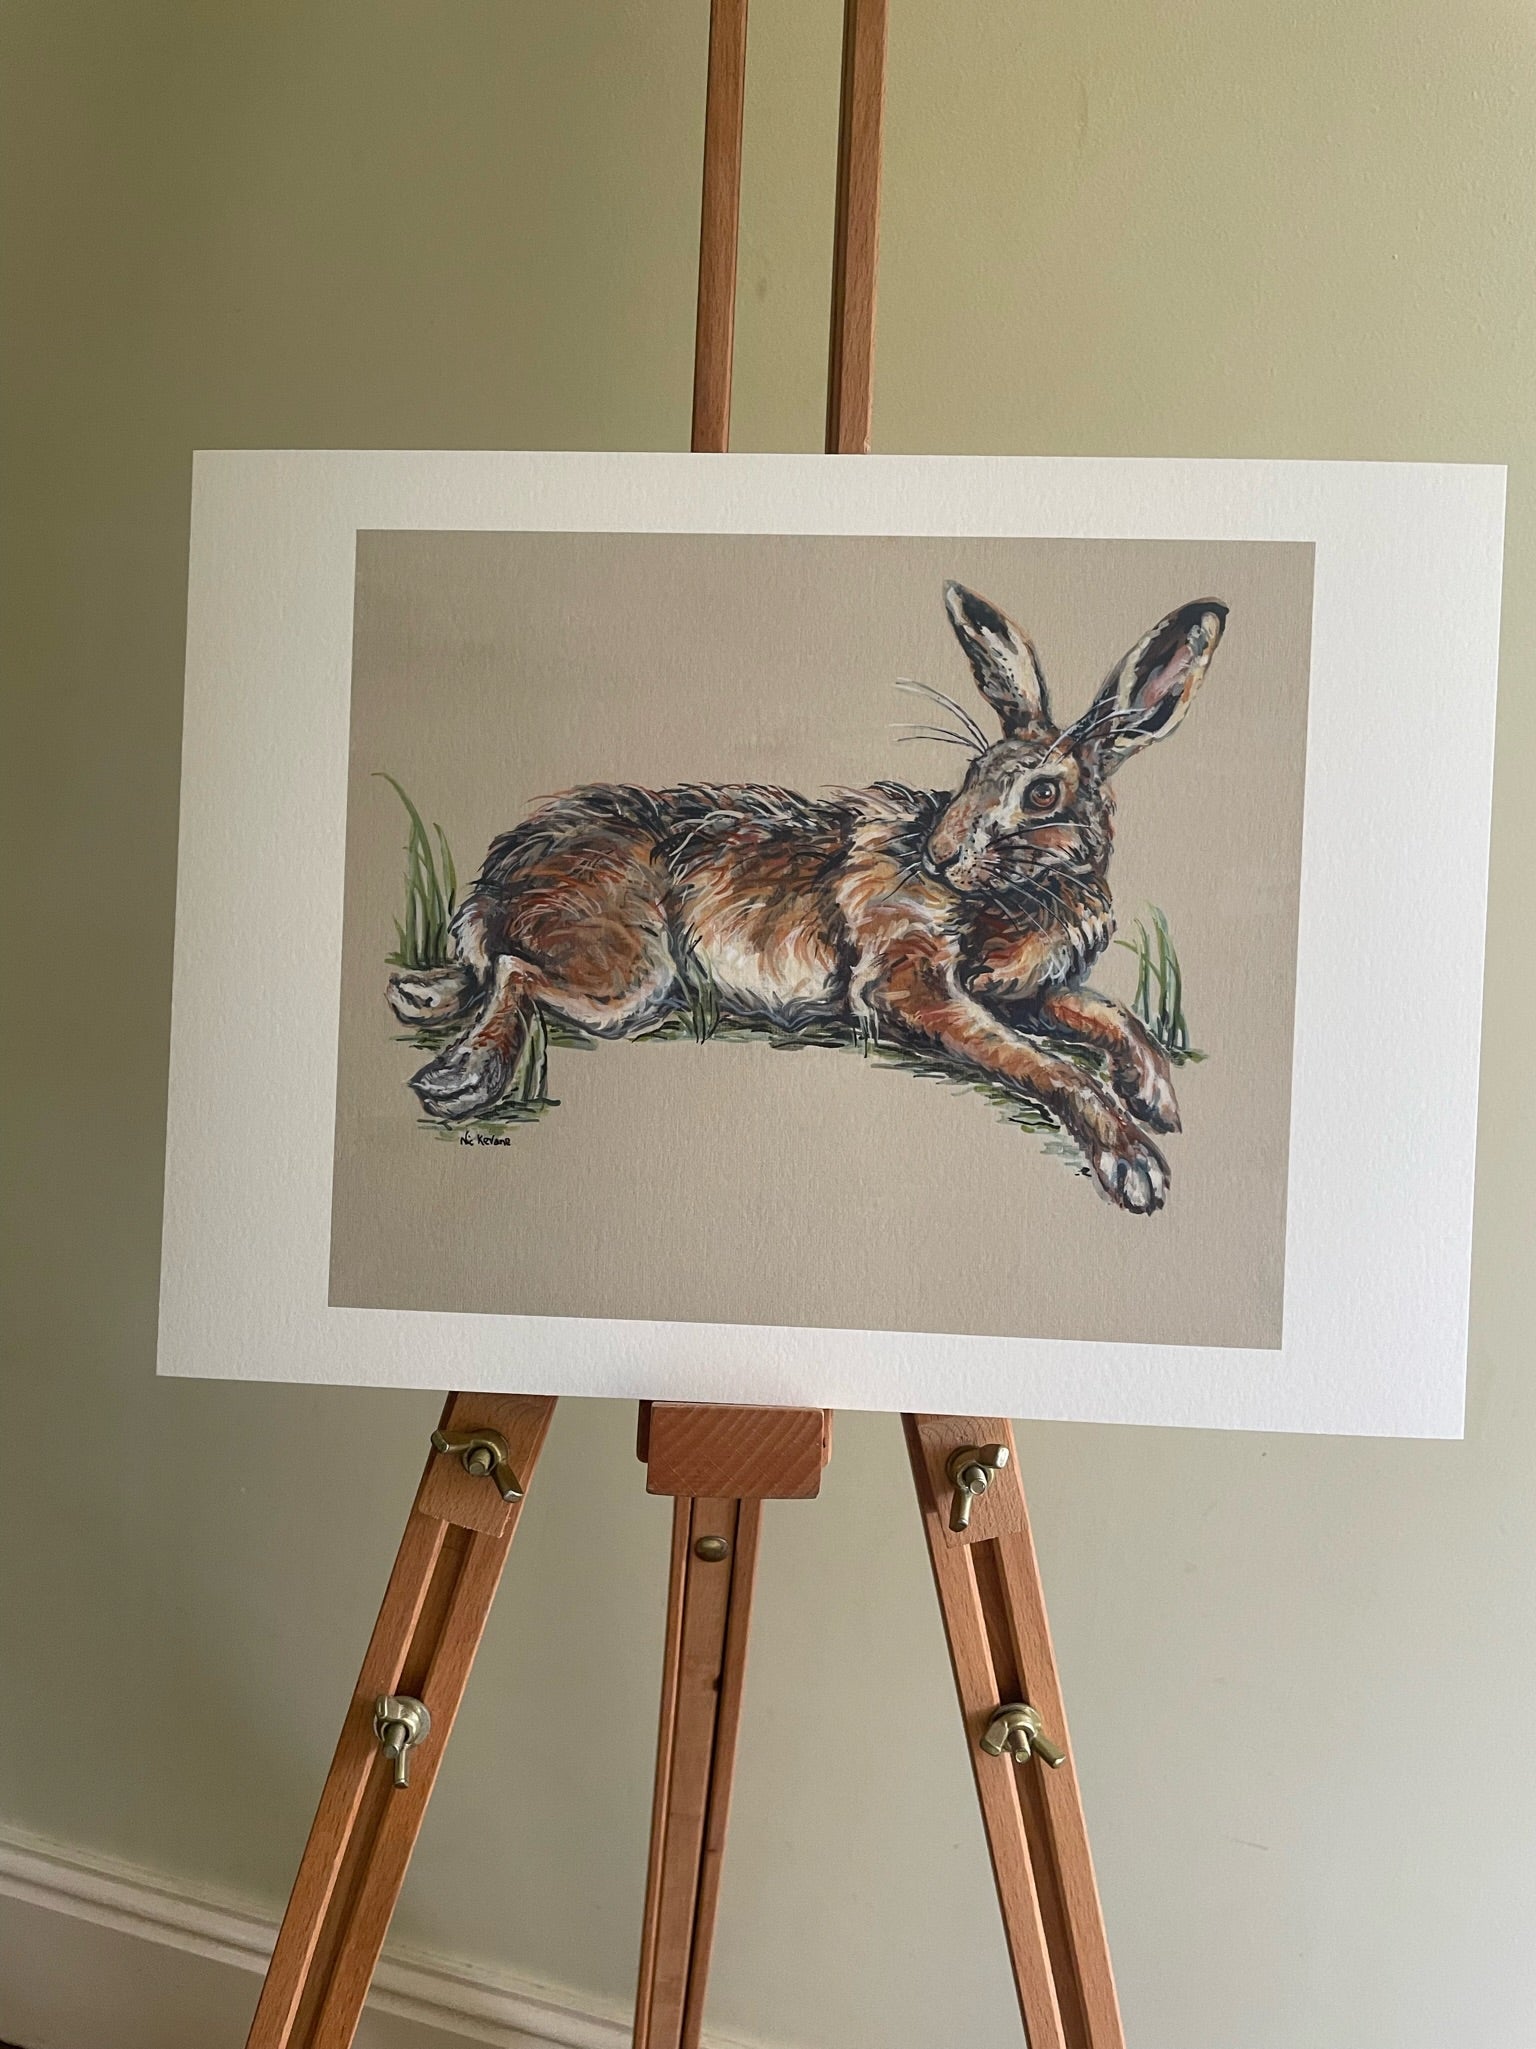 This fine art giclee print shows a hare relaxing in the warmth of the sun.  Inspired by two hares lying in a field of winter wheat in springtime.